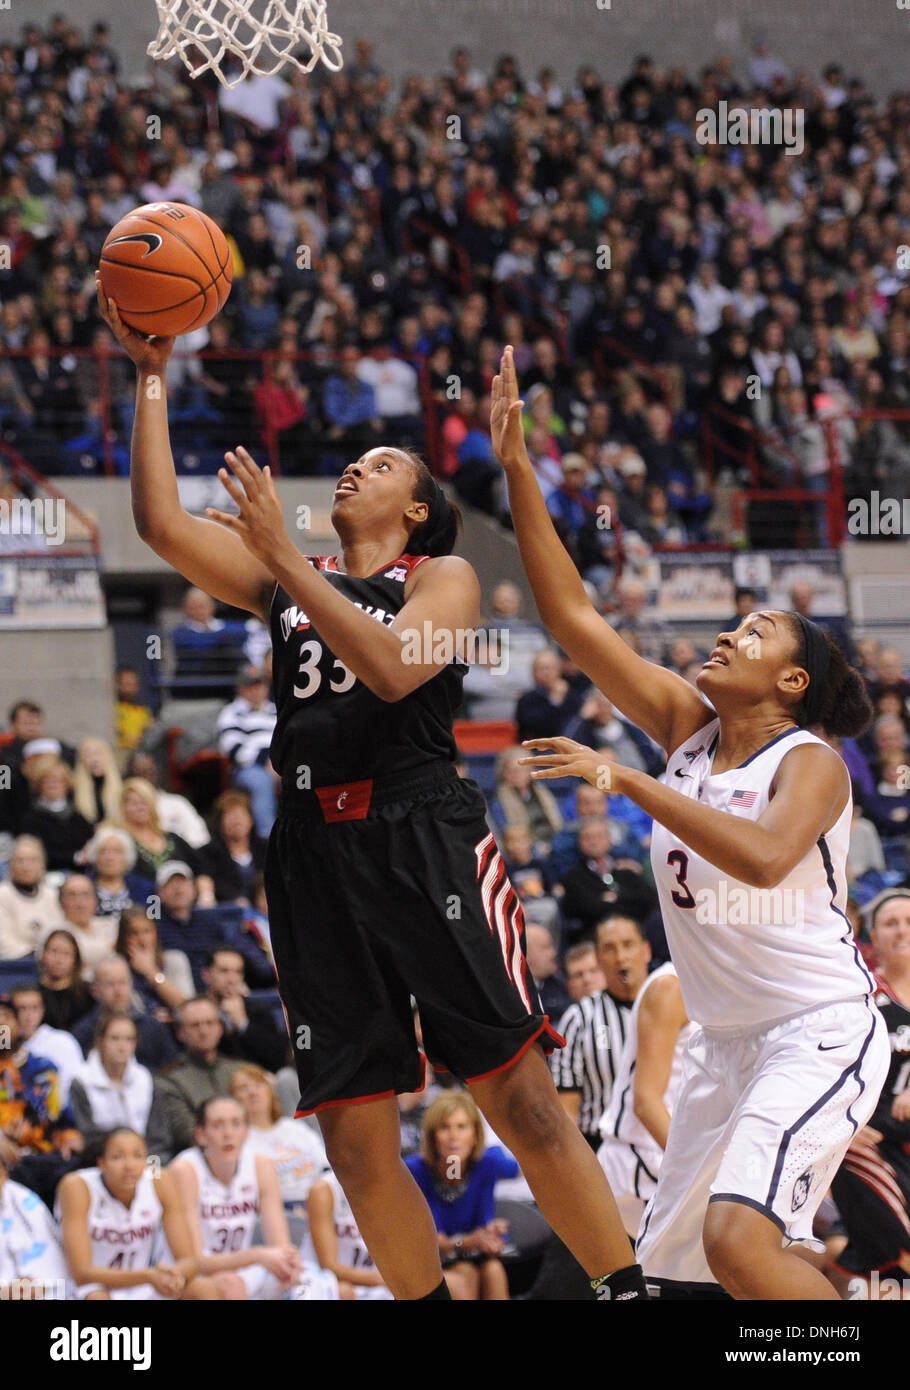 Storrs, CT, USA. 22nd Nov, 2013. Sunday December 29, 2013: Cincinnati Bearcats forward Jeanise Randolph (33) goes to the basket in front of UConn huskies guard-forward Morgan Tuck (3) during the 1st half of the womens NCAA basketball game between Cincinnati and Connecticut at Gampel Pavilion in Storrs, CT. Bill Shettle / Cal Sport Media. © csm/Alamy Live News Stock Photo